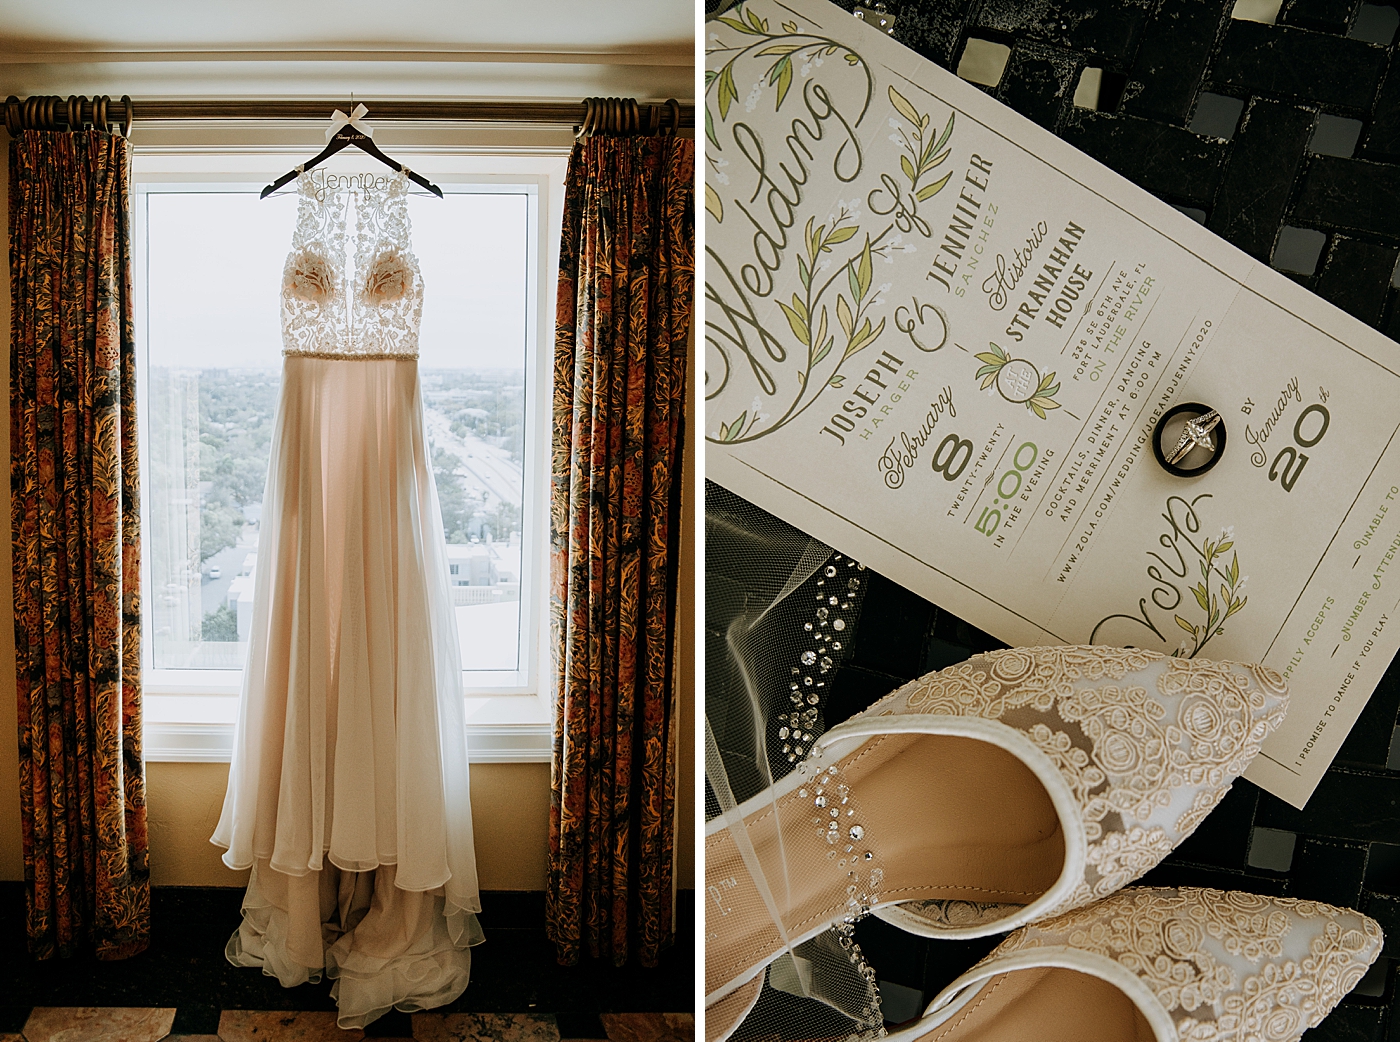 Wedding detail shots of laced wedding dress and shoes and invitation Historic Stranahan House Wedding Photography captured by South Florida Wedding Photographer Maggie Alvarez Photography